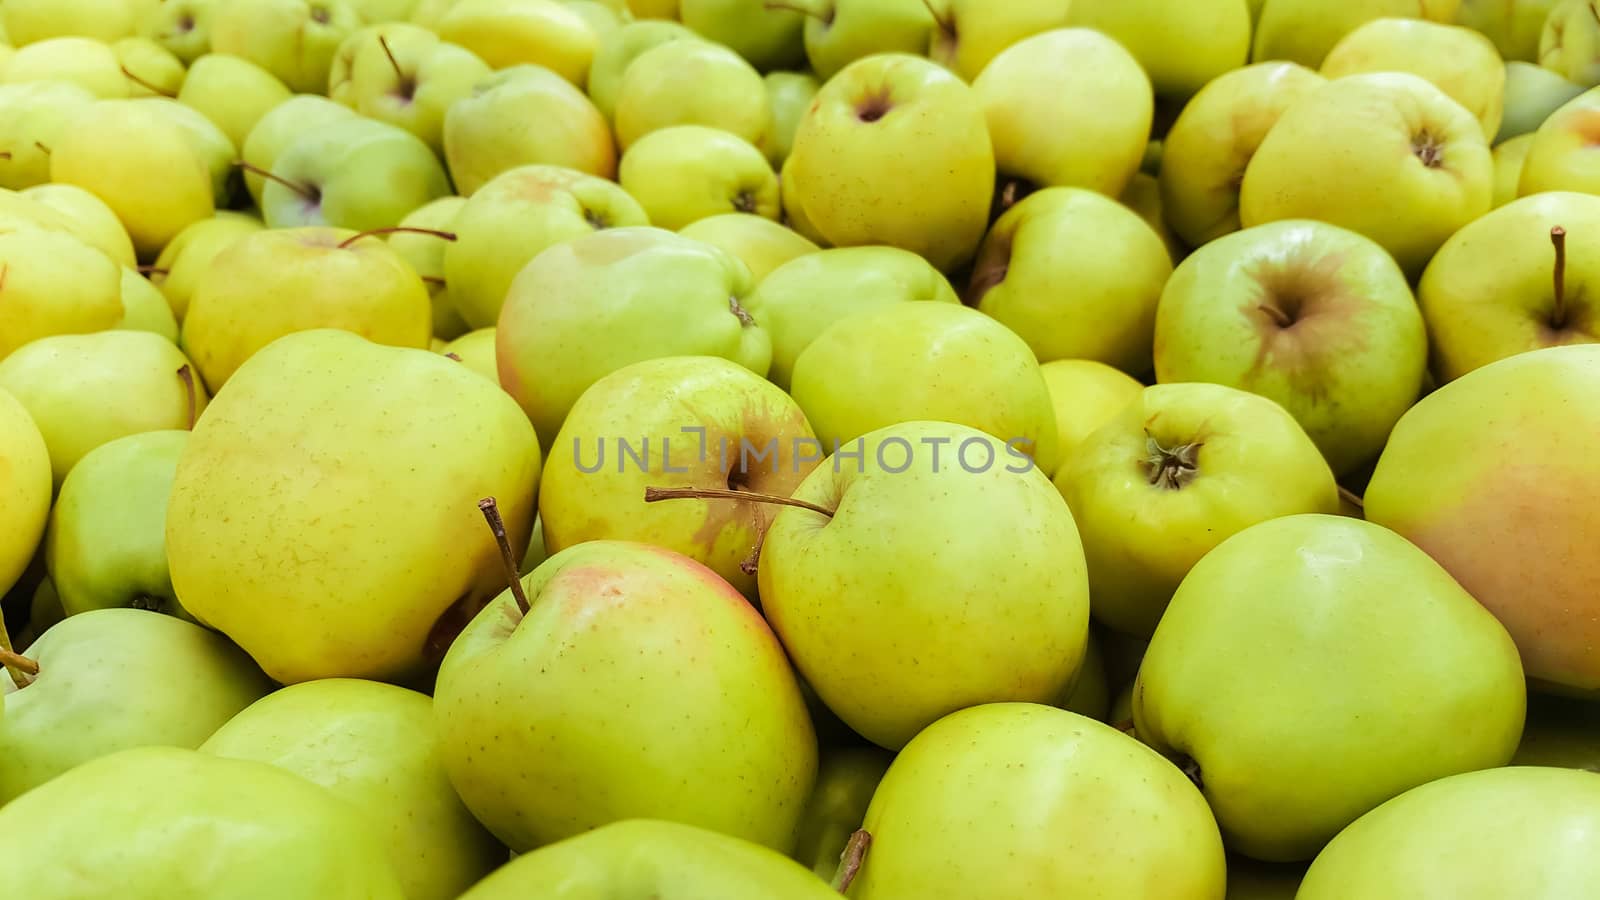 Green Apple Background, shallow depth of field.